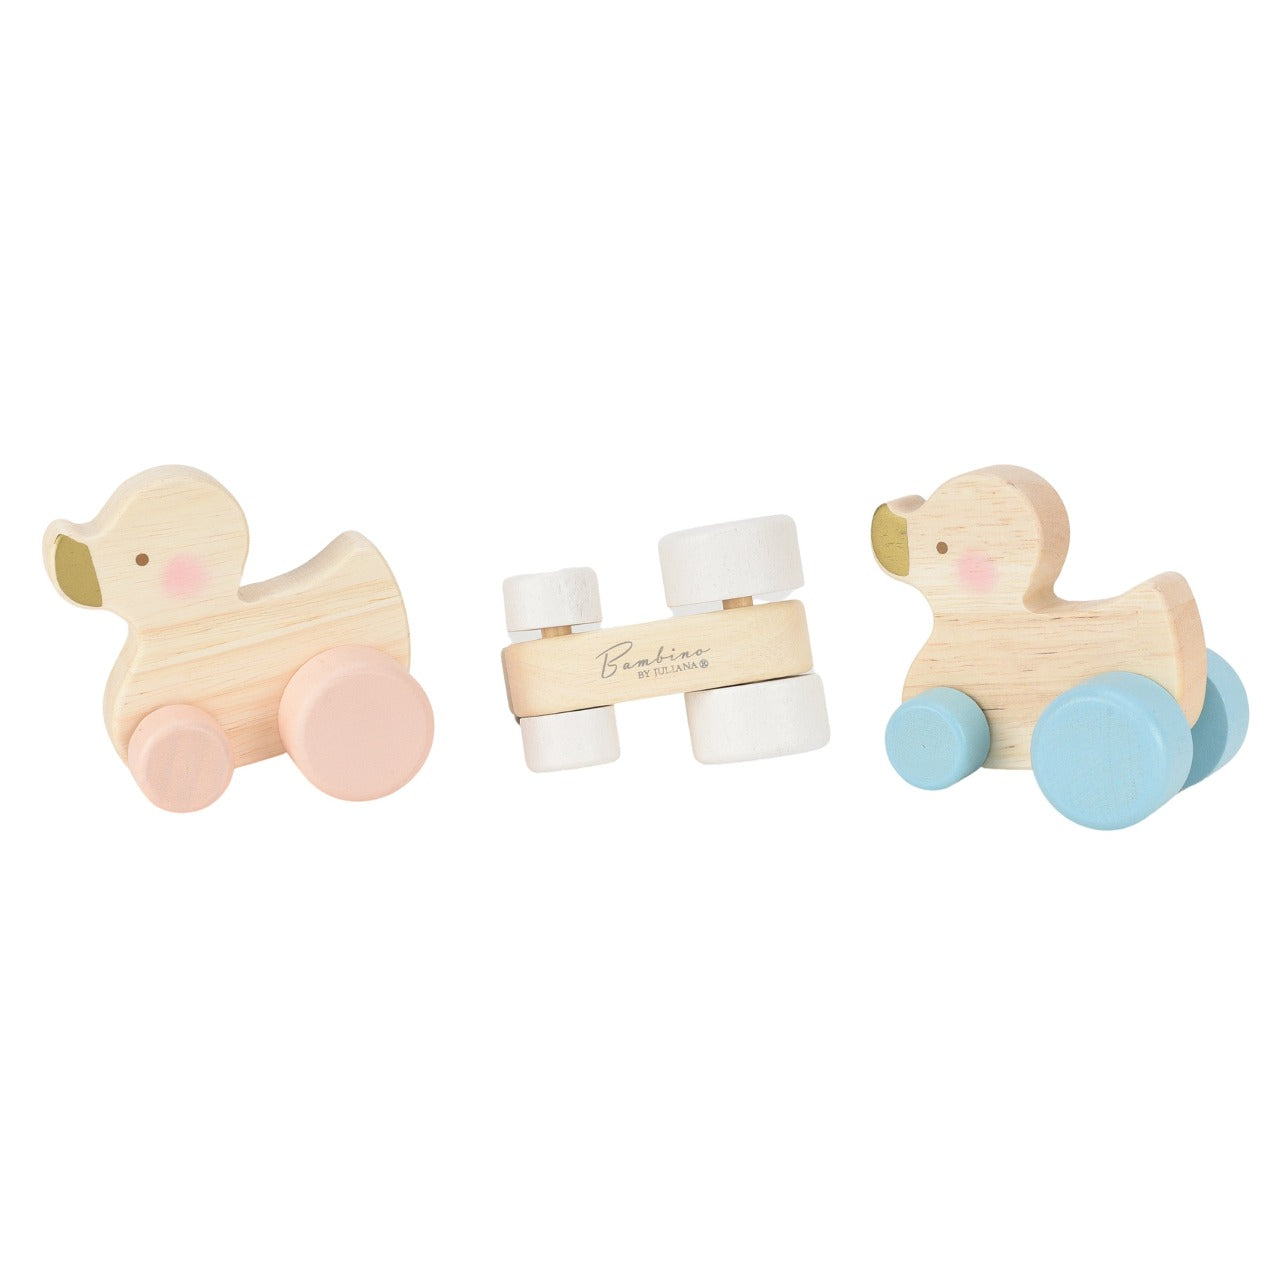 Bambino Wood Duck Push Toy  Help your little one develop their coordination skills with one of these adorable wooden duck push toys. From BAMBINO BY JULIANA® - opening new eyes to a world of wonder.